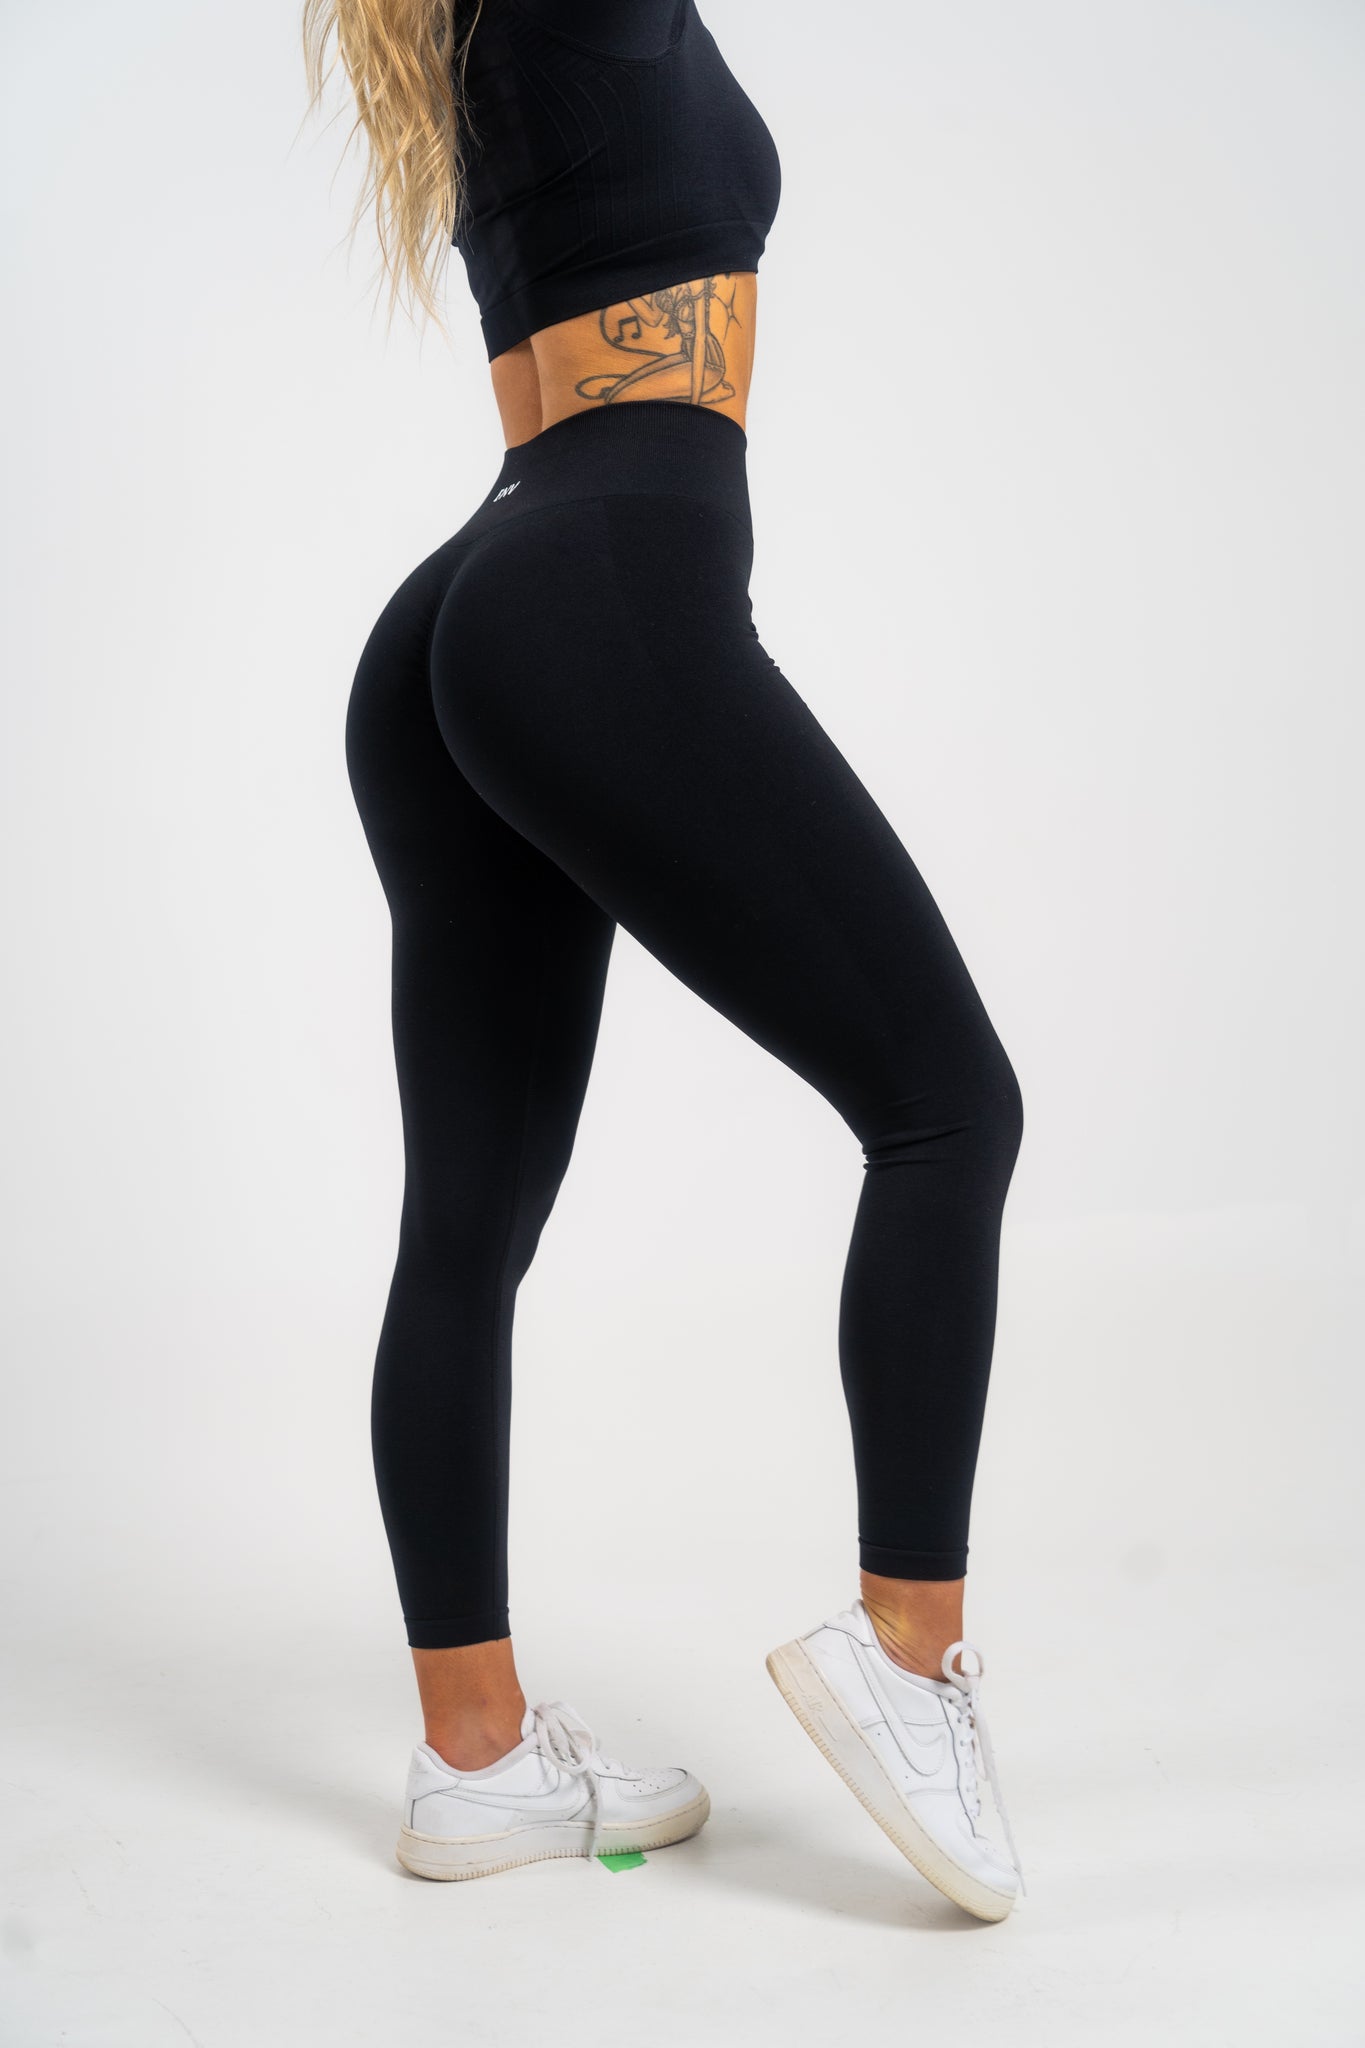 Spindle Legging: Black with Stripe Waistband – VPL